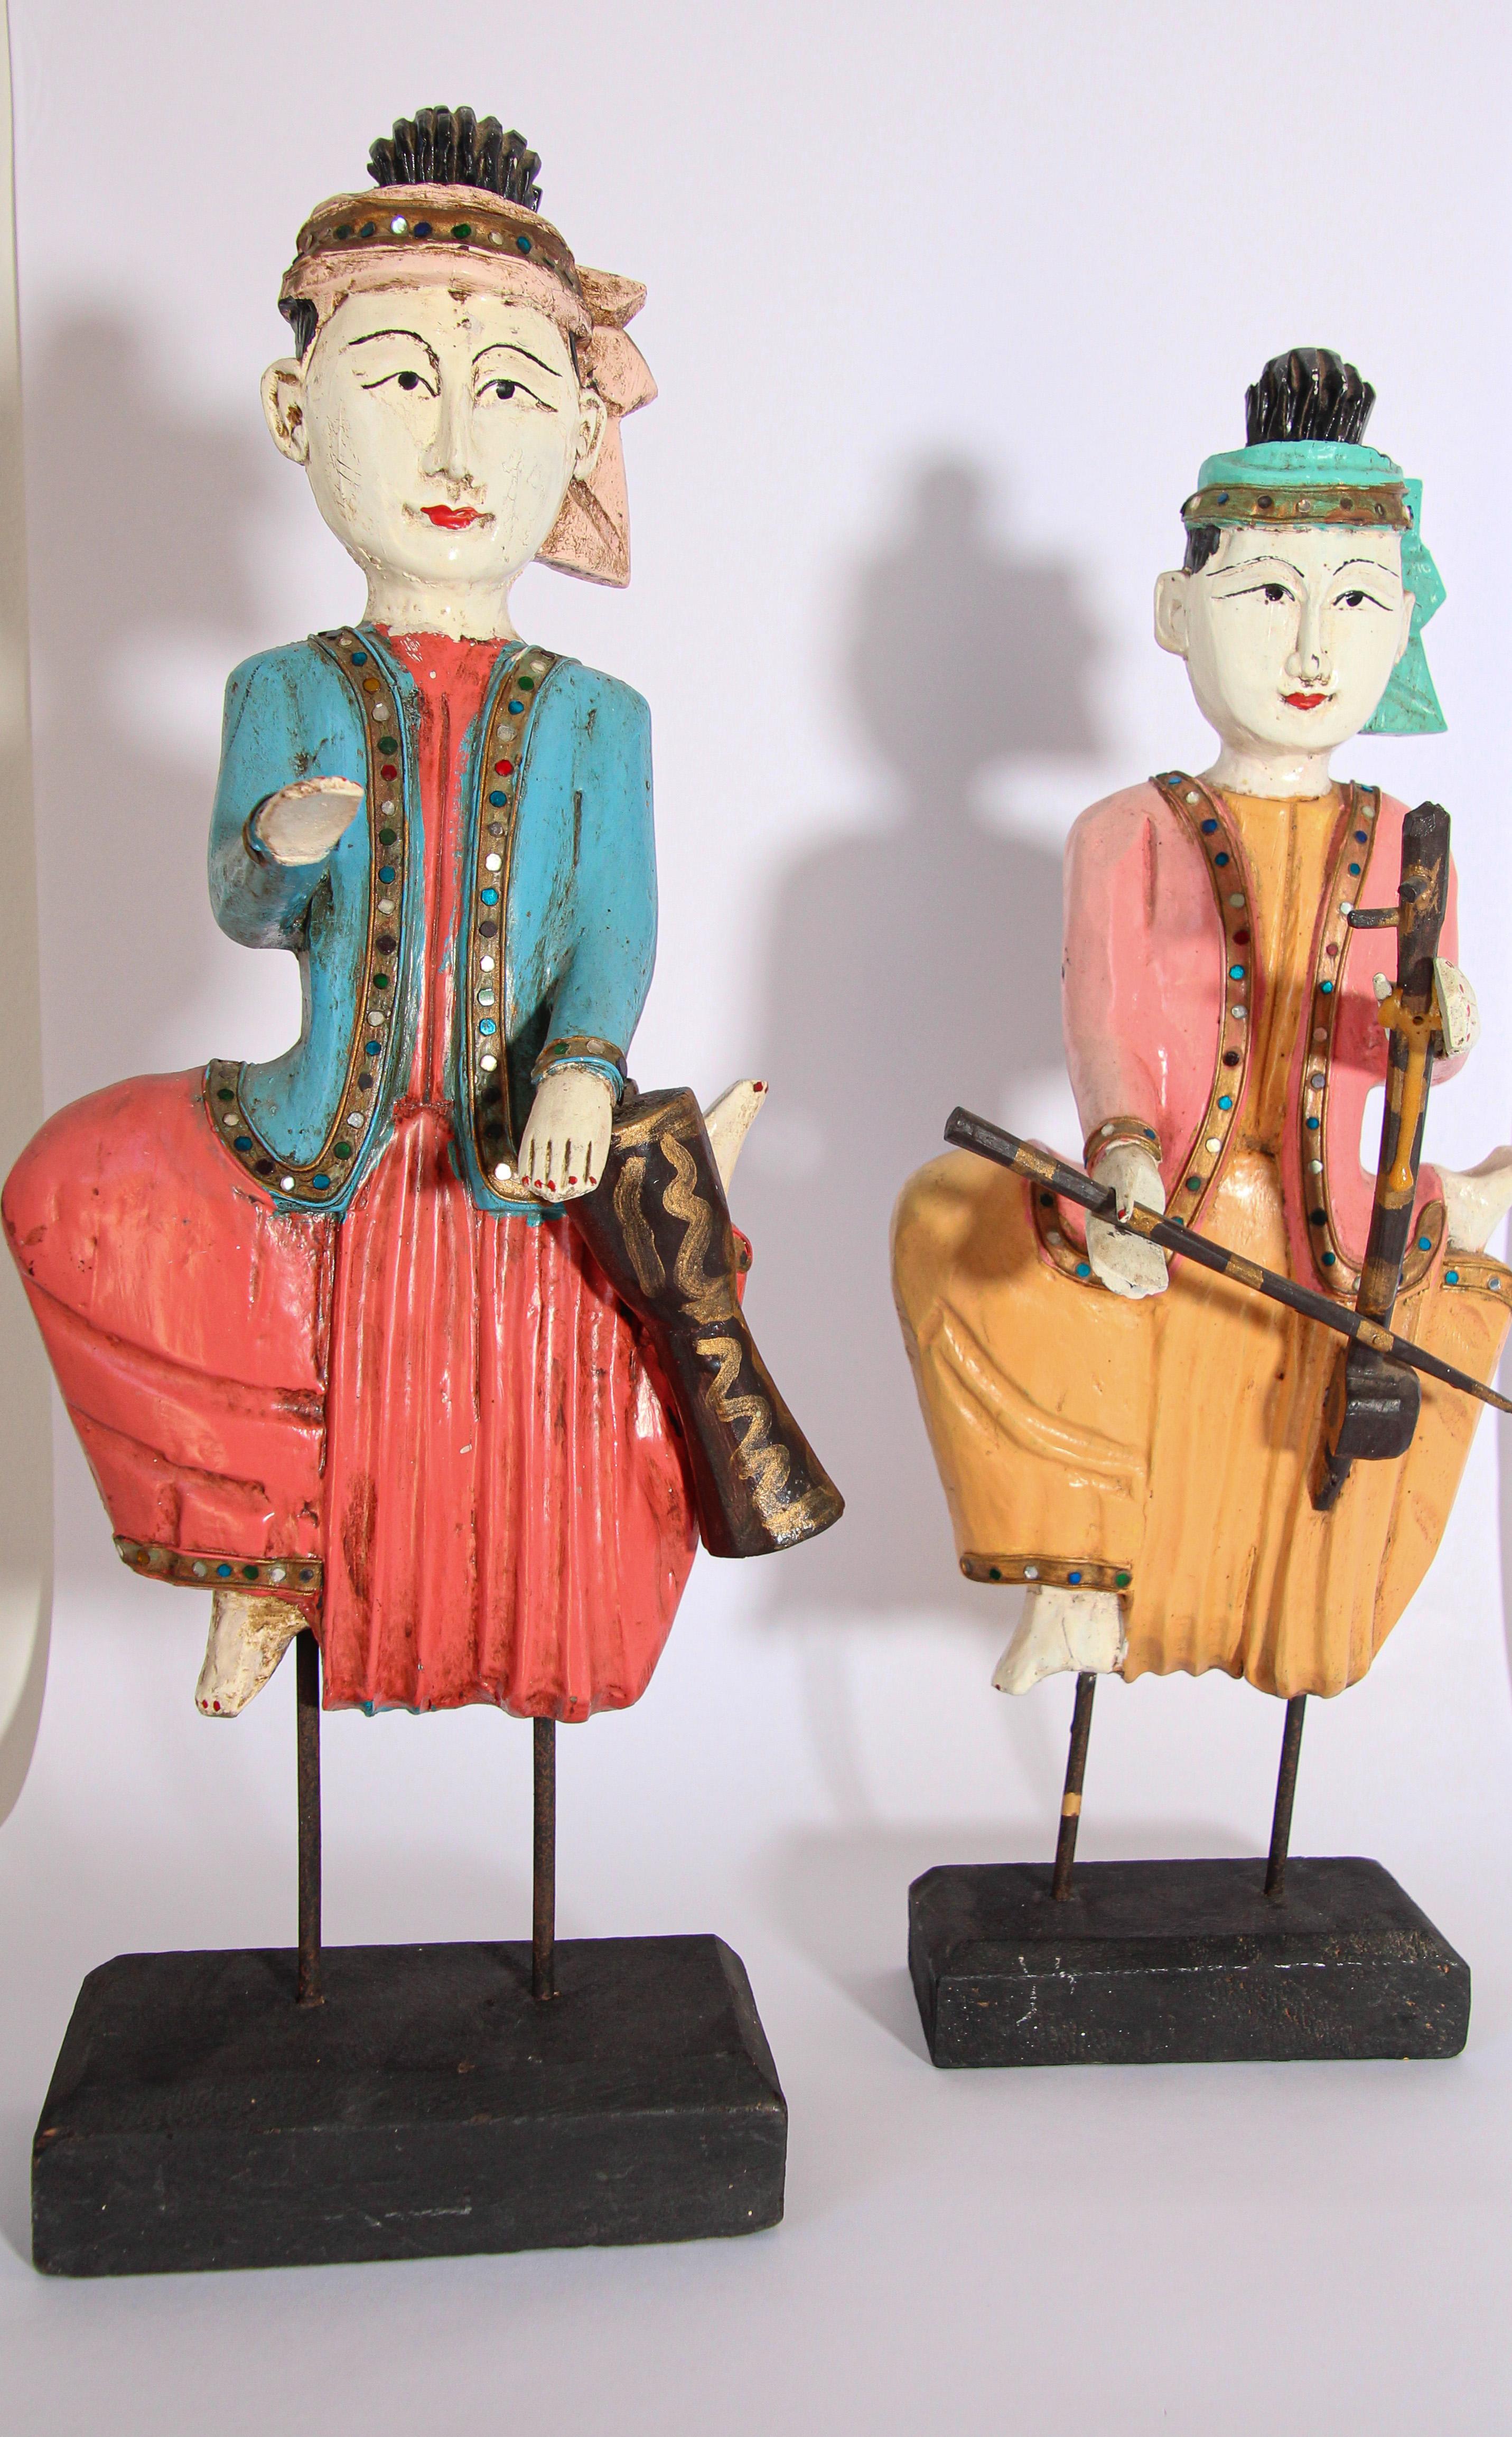 Set of two vintage Thai carved wood colorful sculptures.
Hand carved and hand painted wooden figures depicting traditional Thai musicians. 
The figure sculpture musicians seated are holding a drum and string instrument.
Thai musicians, portrayed